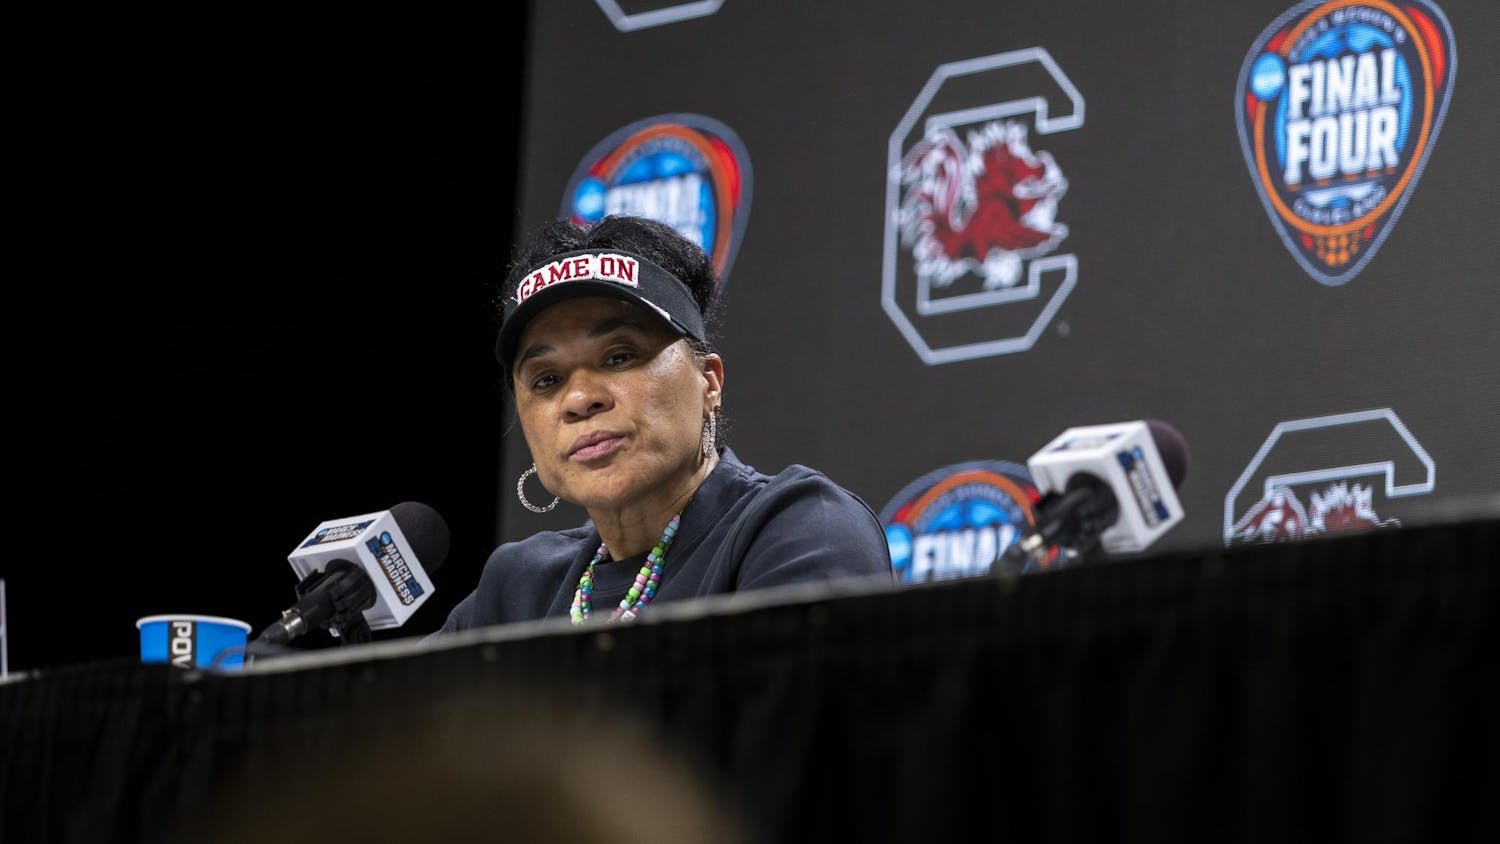 ɫɫƵ women’s basketball head coach Dawn Staley answers questions during a press conference ahead of the NCAA women's basketball final in Cleveland, Ohio. Staley spoke about the team's preparation for the final game against the Iowa Hawkeyes, saying that the team is focused and prepared for the matchup.